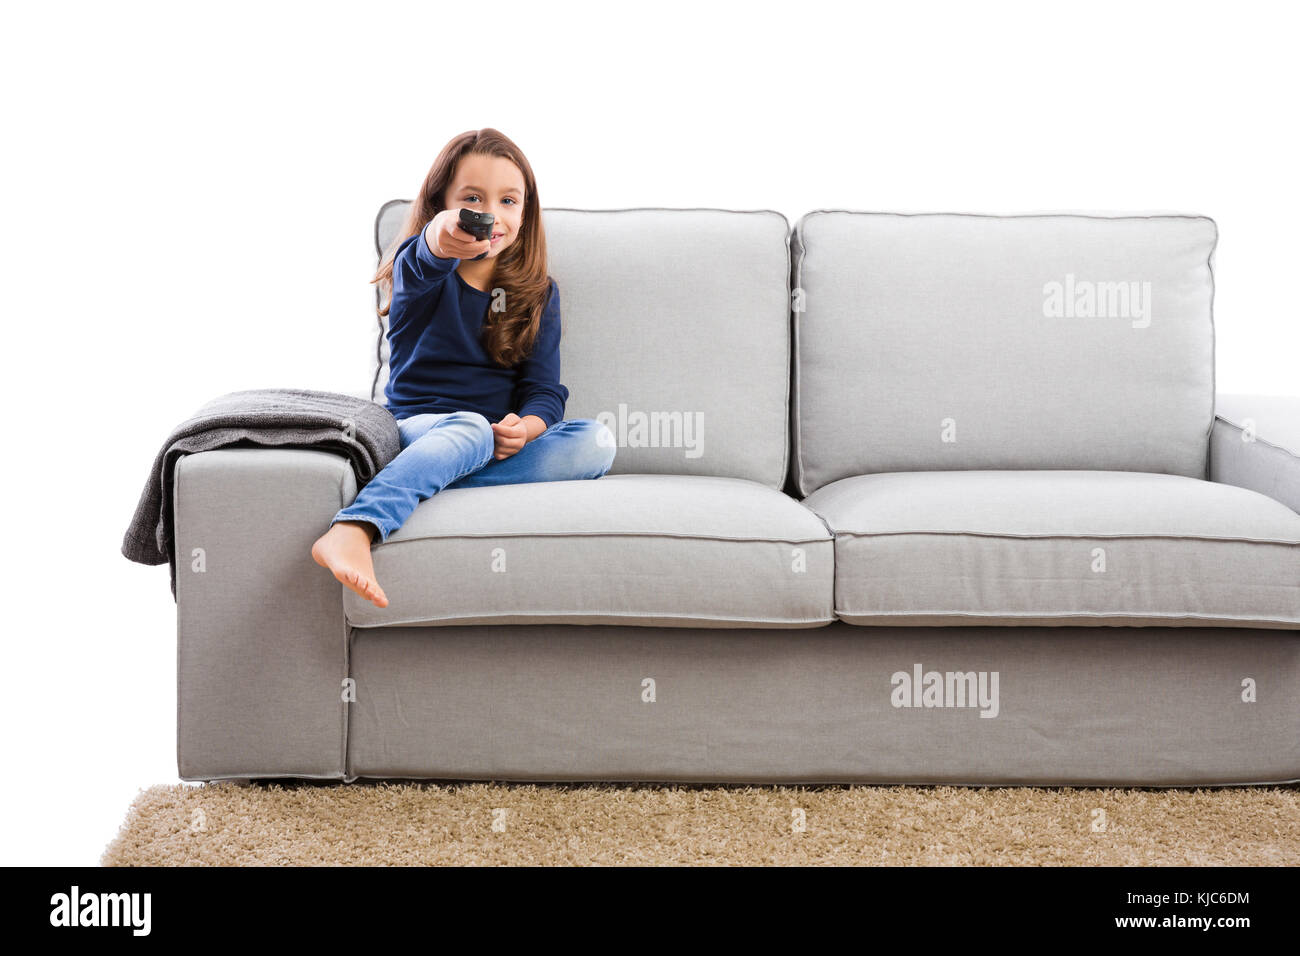 Little girl holding a TV remote control Stock Photo